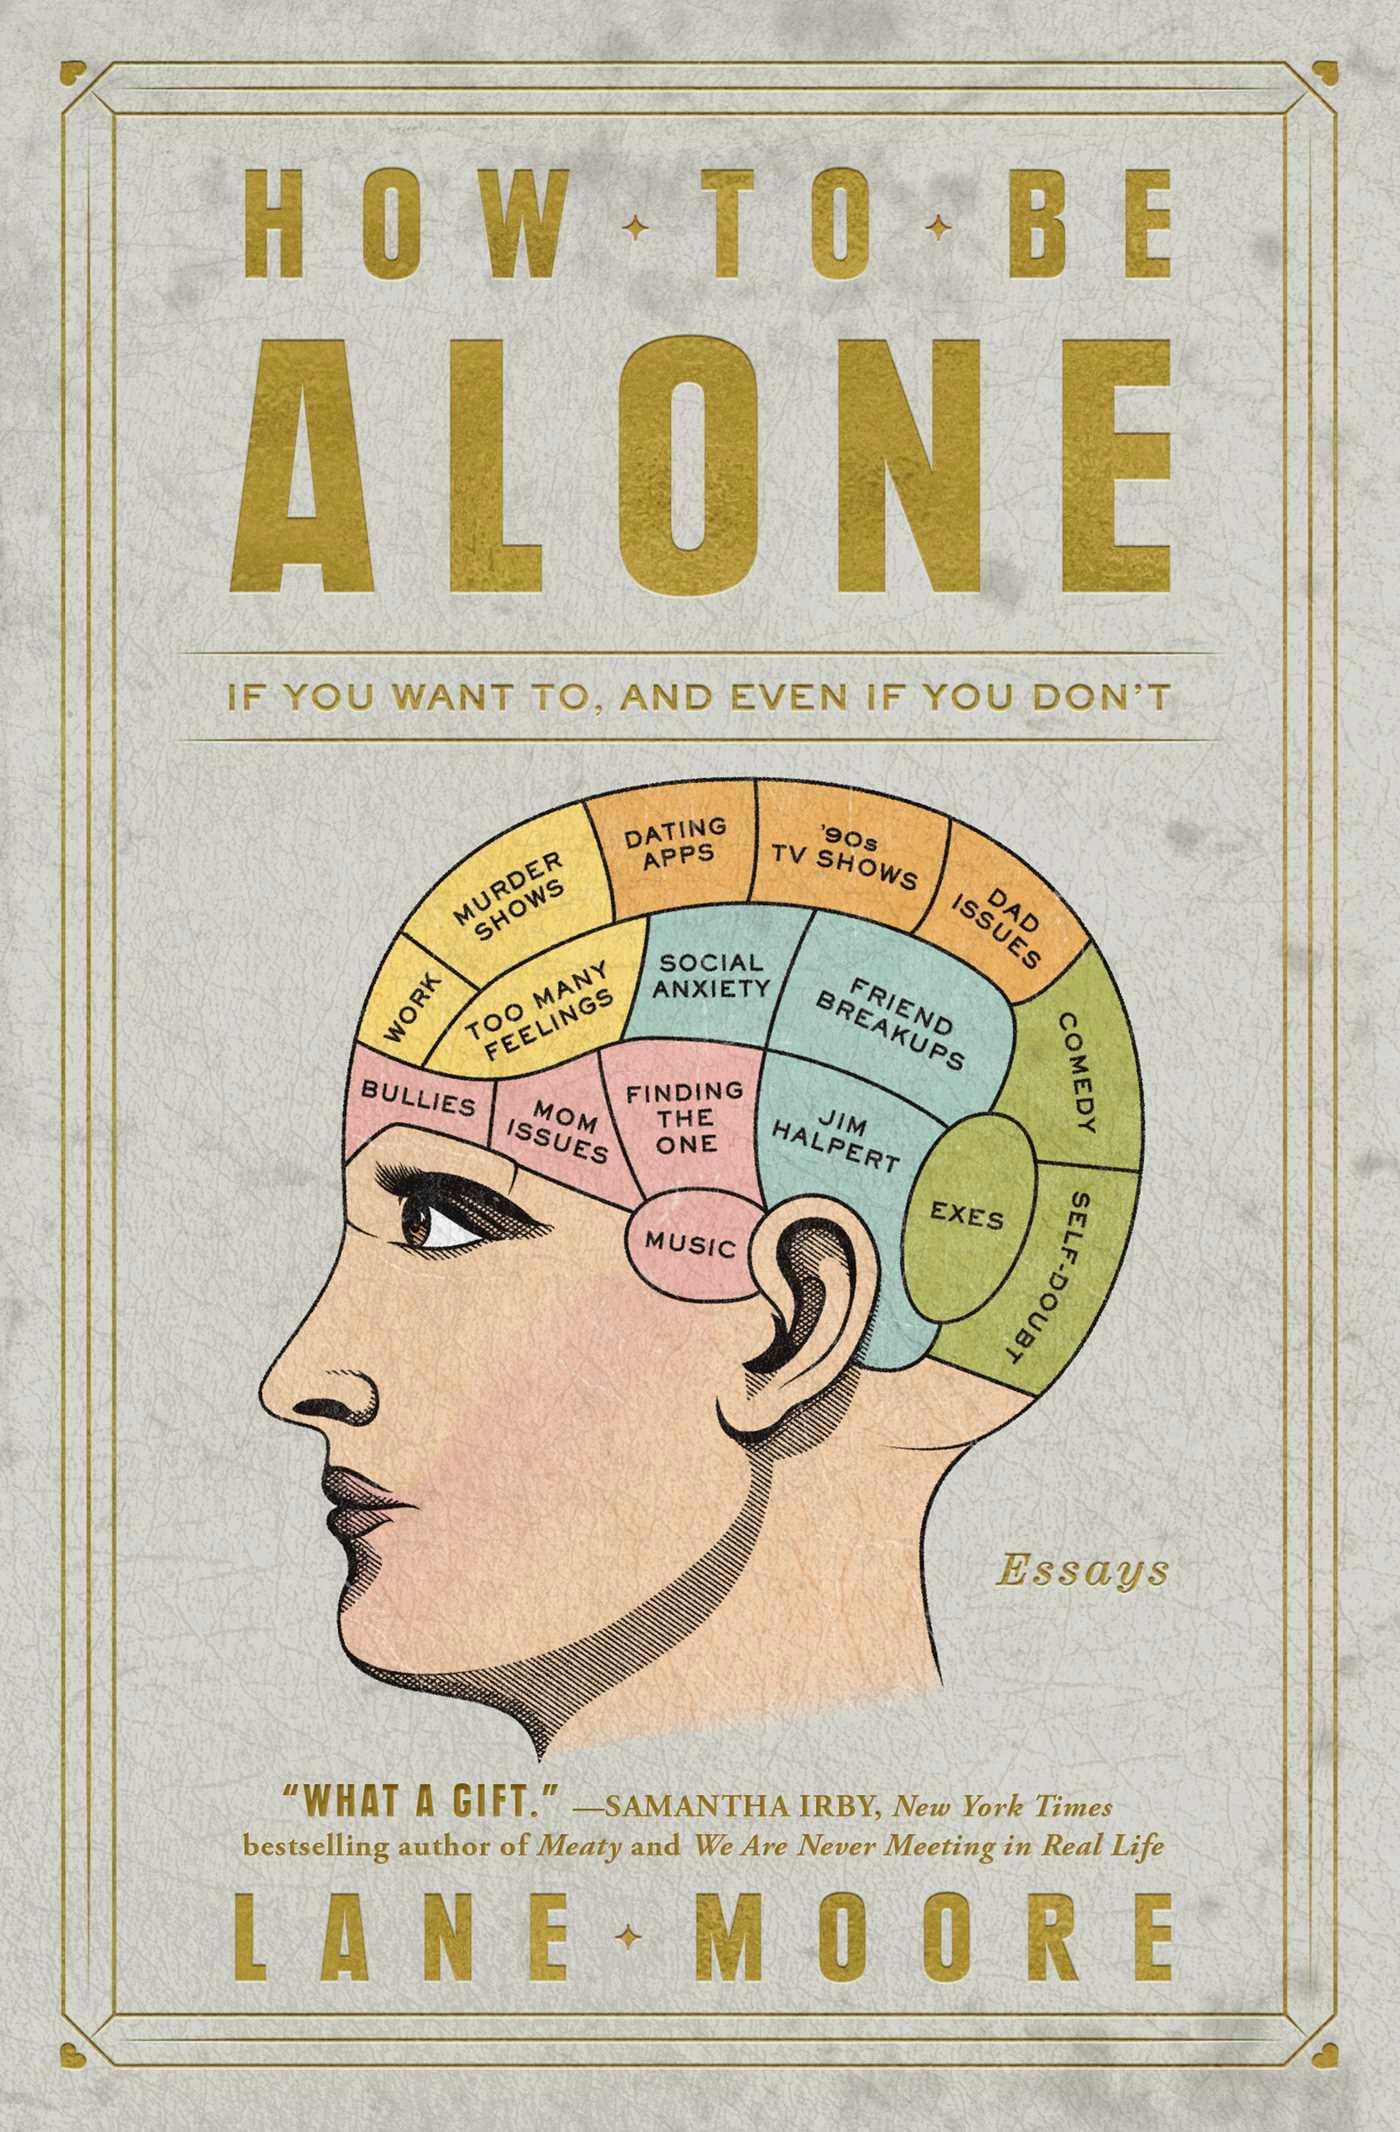 How to Be Alone: If You Want To, and Even If You Don't - undefined